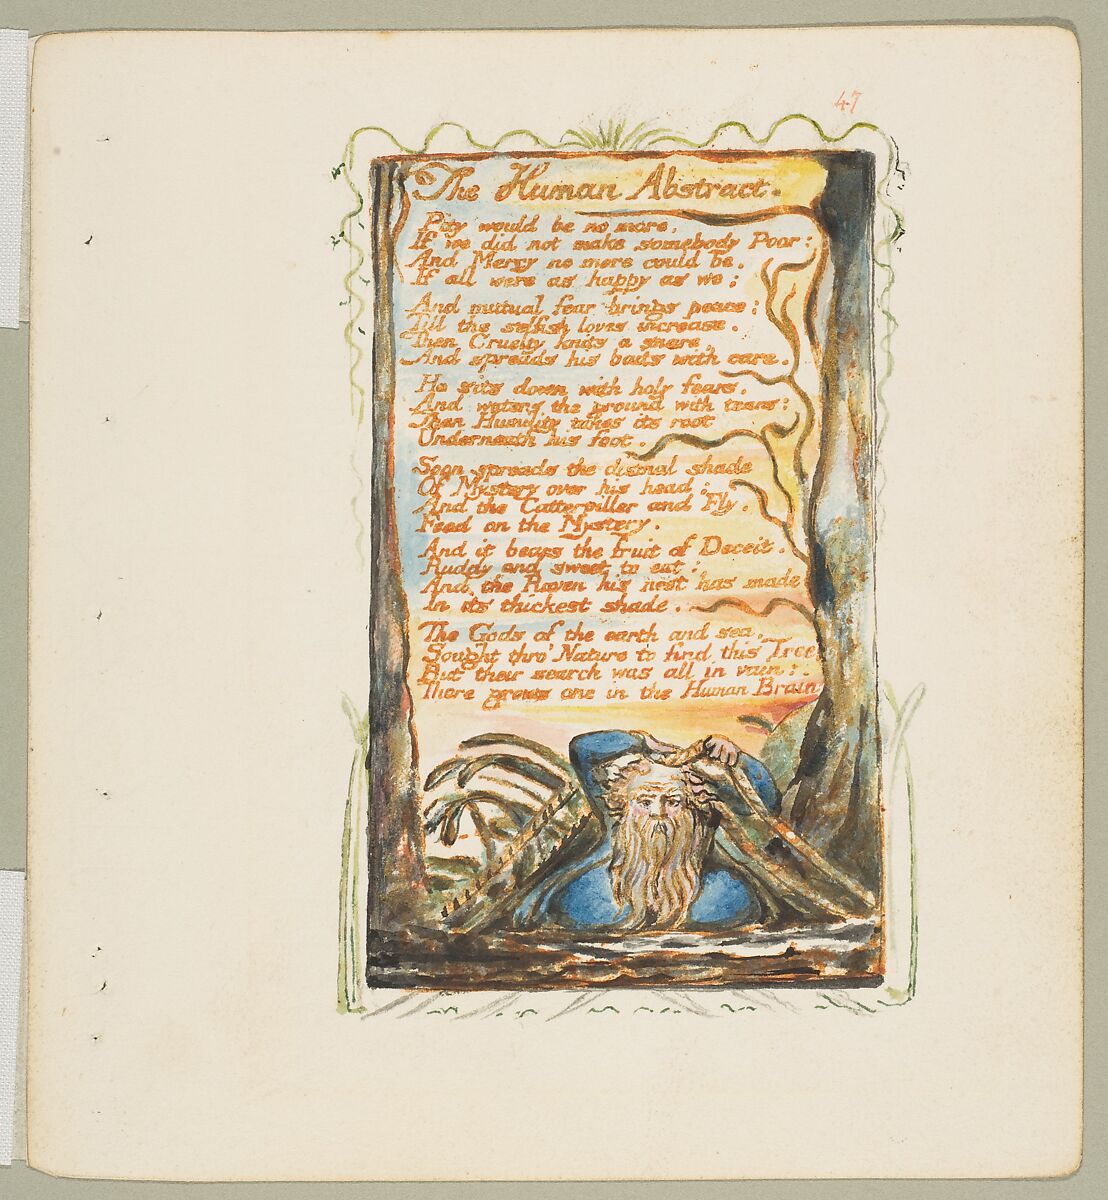 Songs of Experience: The Human Abstract, William Blake  British, Relief etching printed in orange-brown ink and hand-colored with watercolor and shell gold